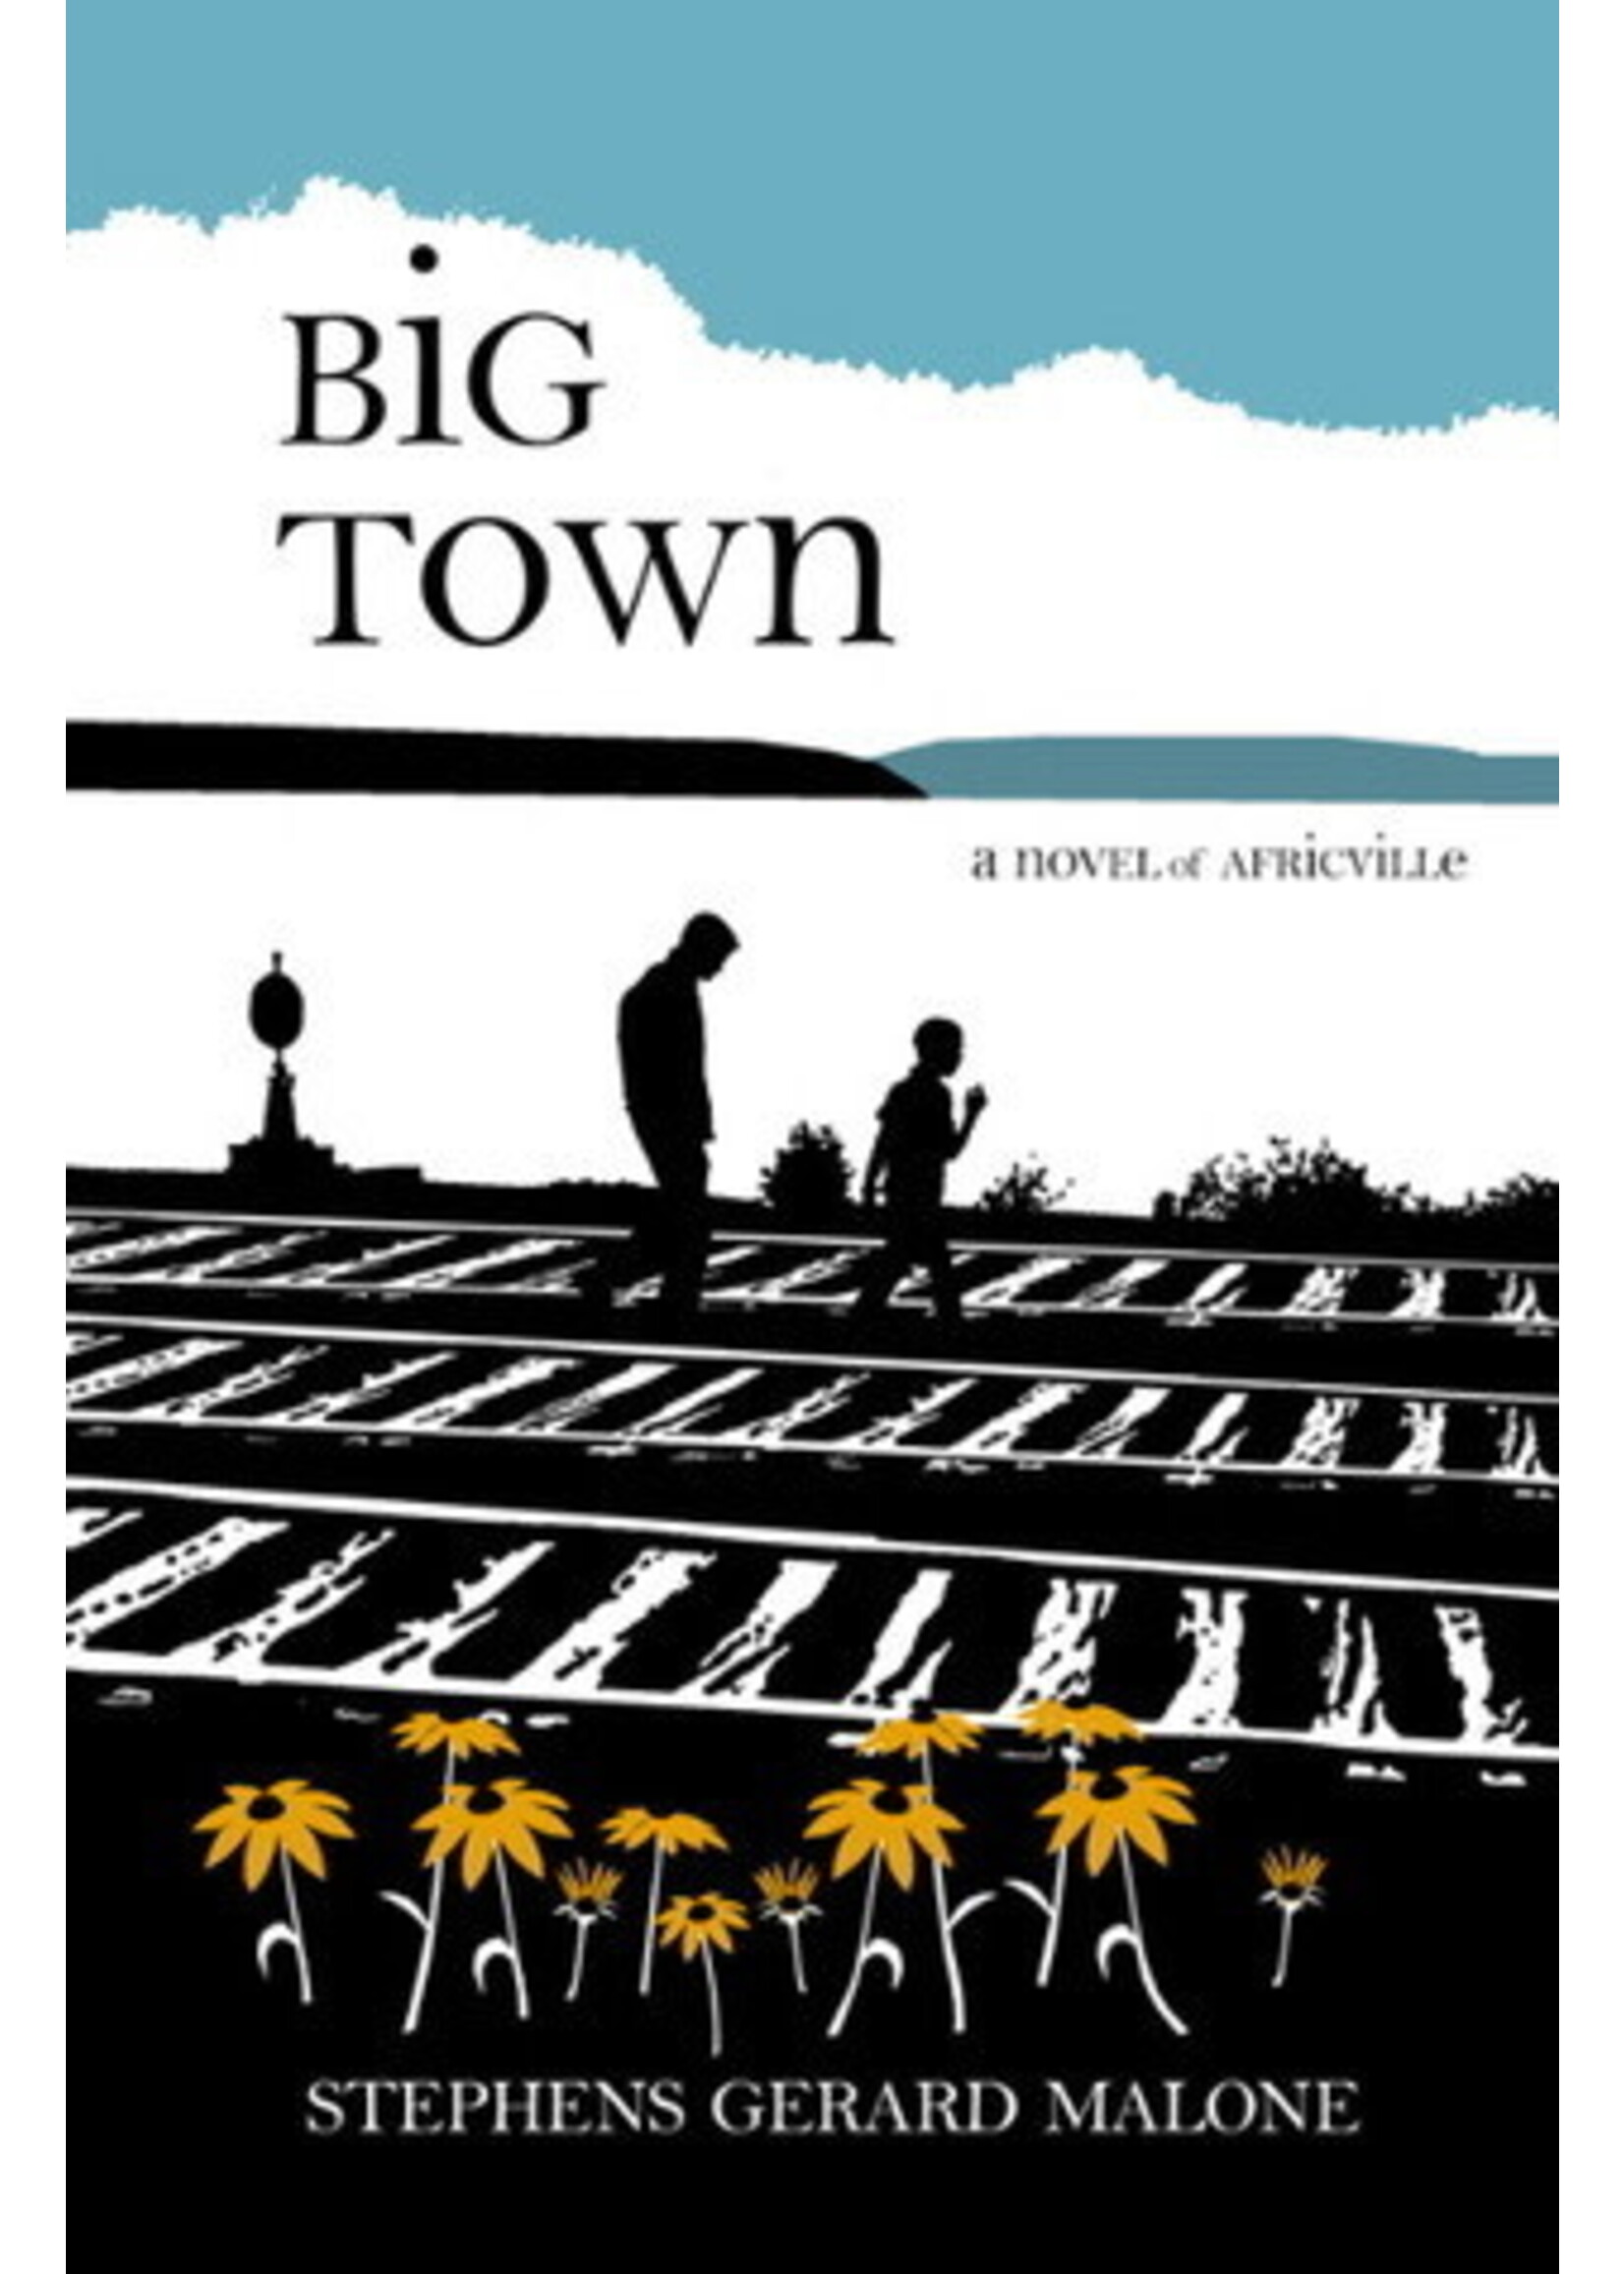 Big Town by Stephens Gerard Malone